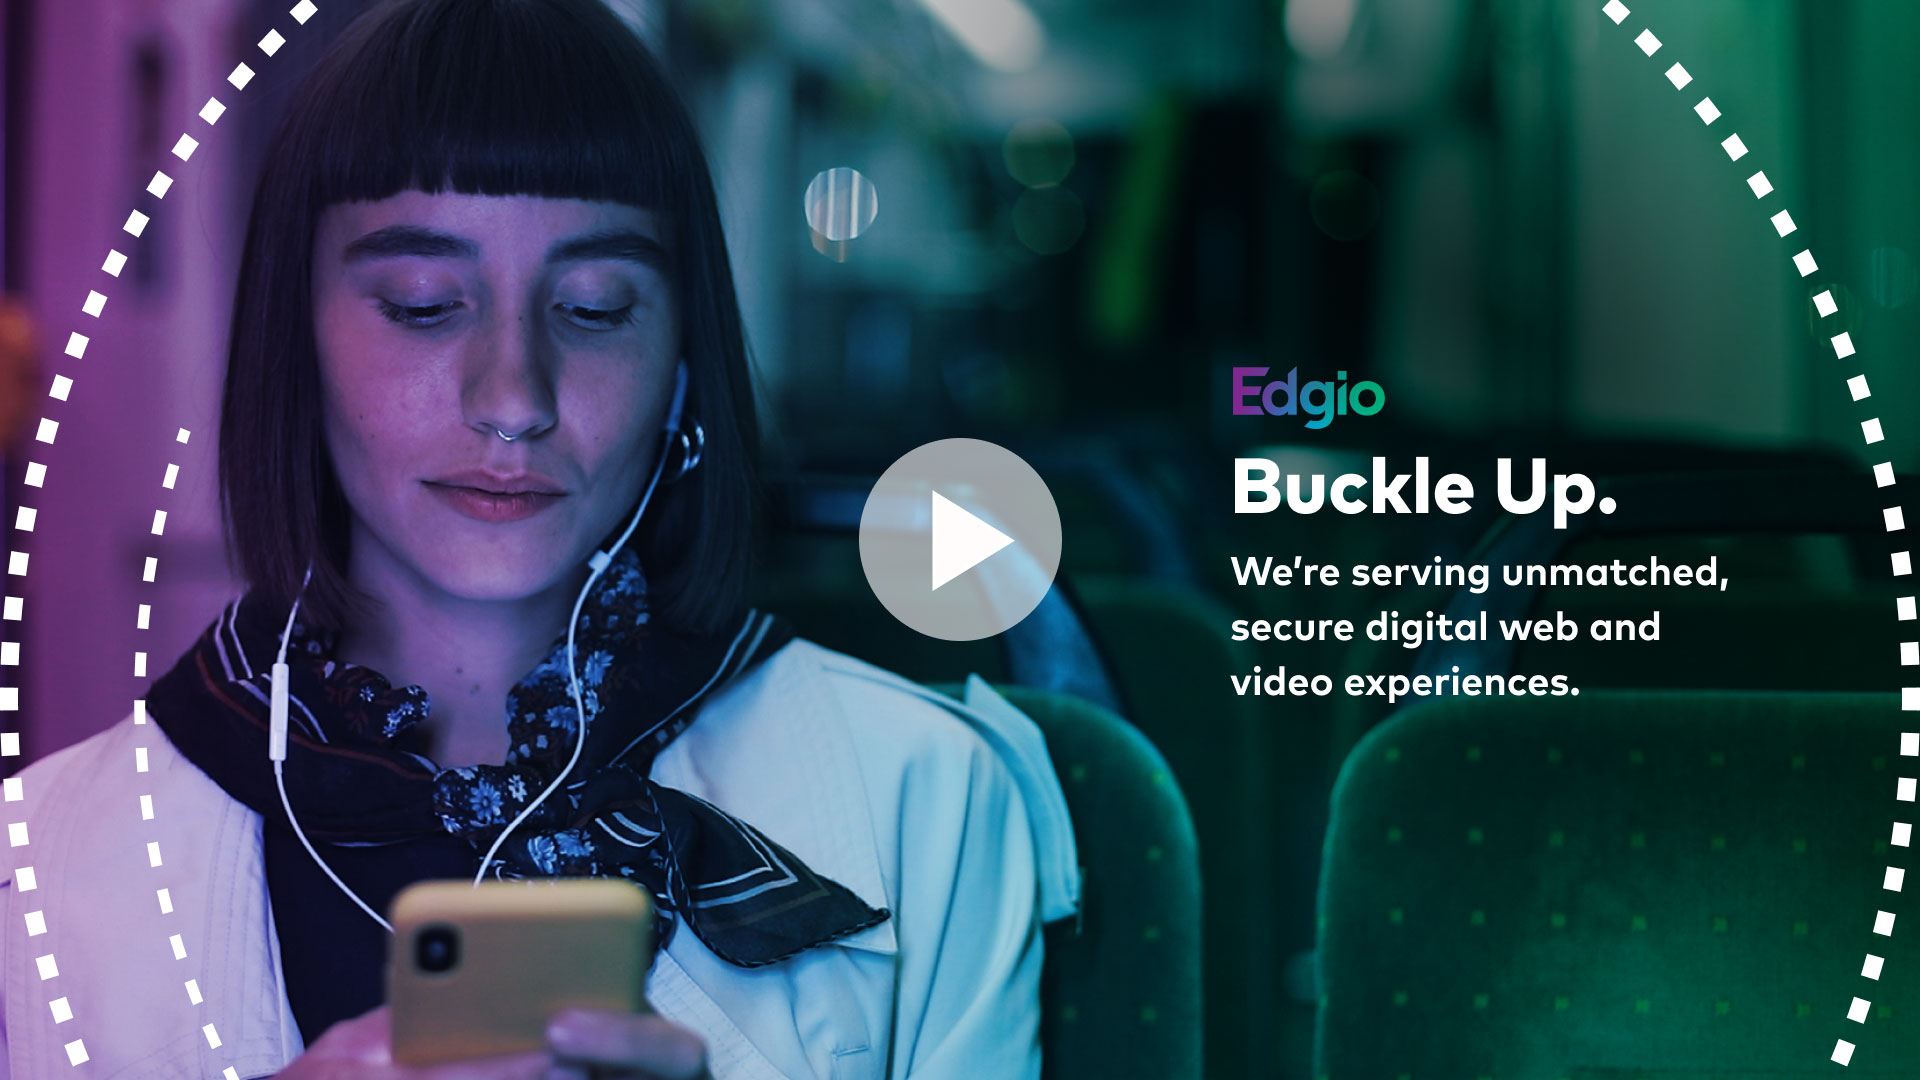 Buckle Up. We’re serving unmatched, secure digital web and video experiences.